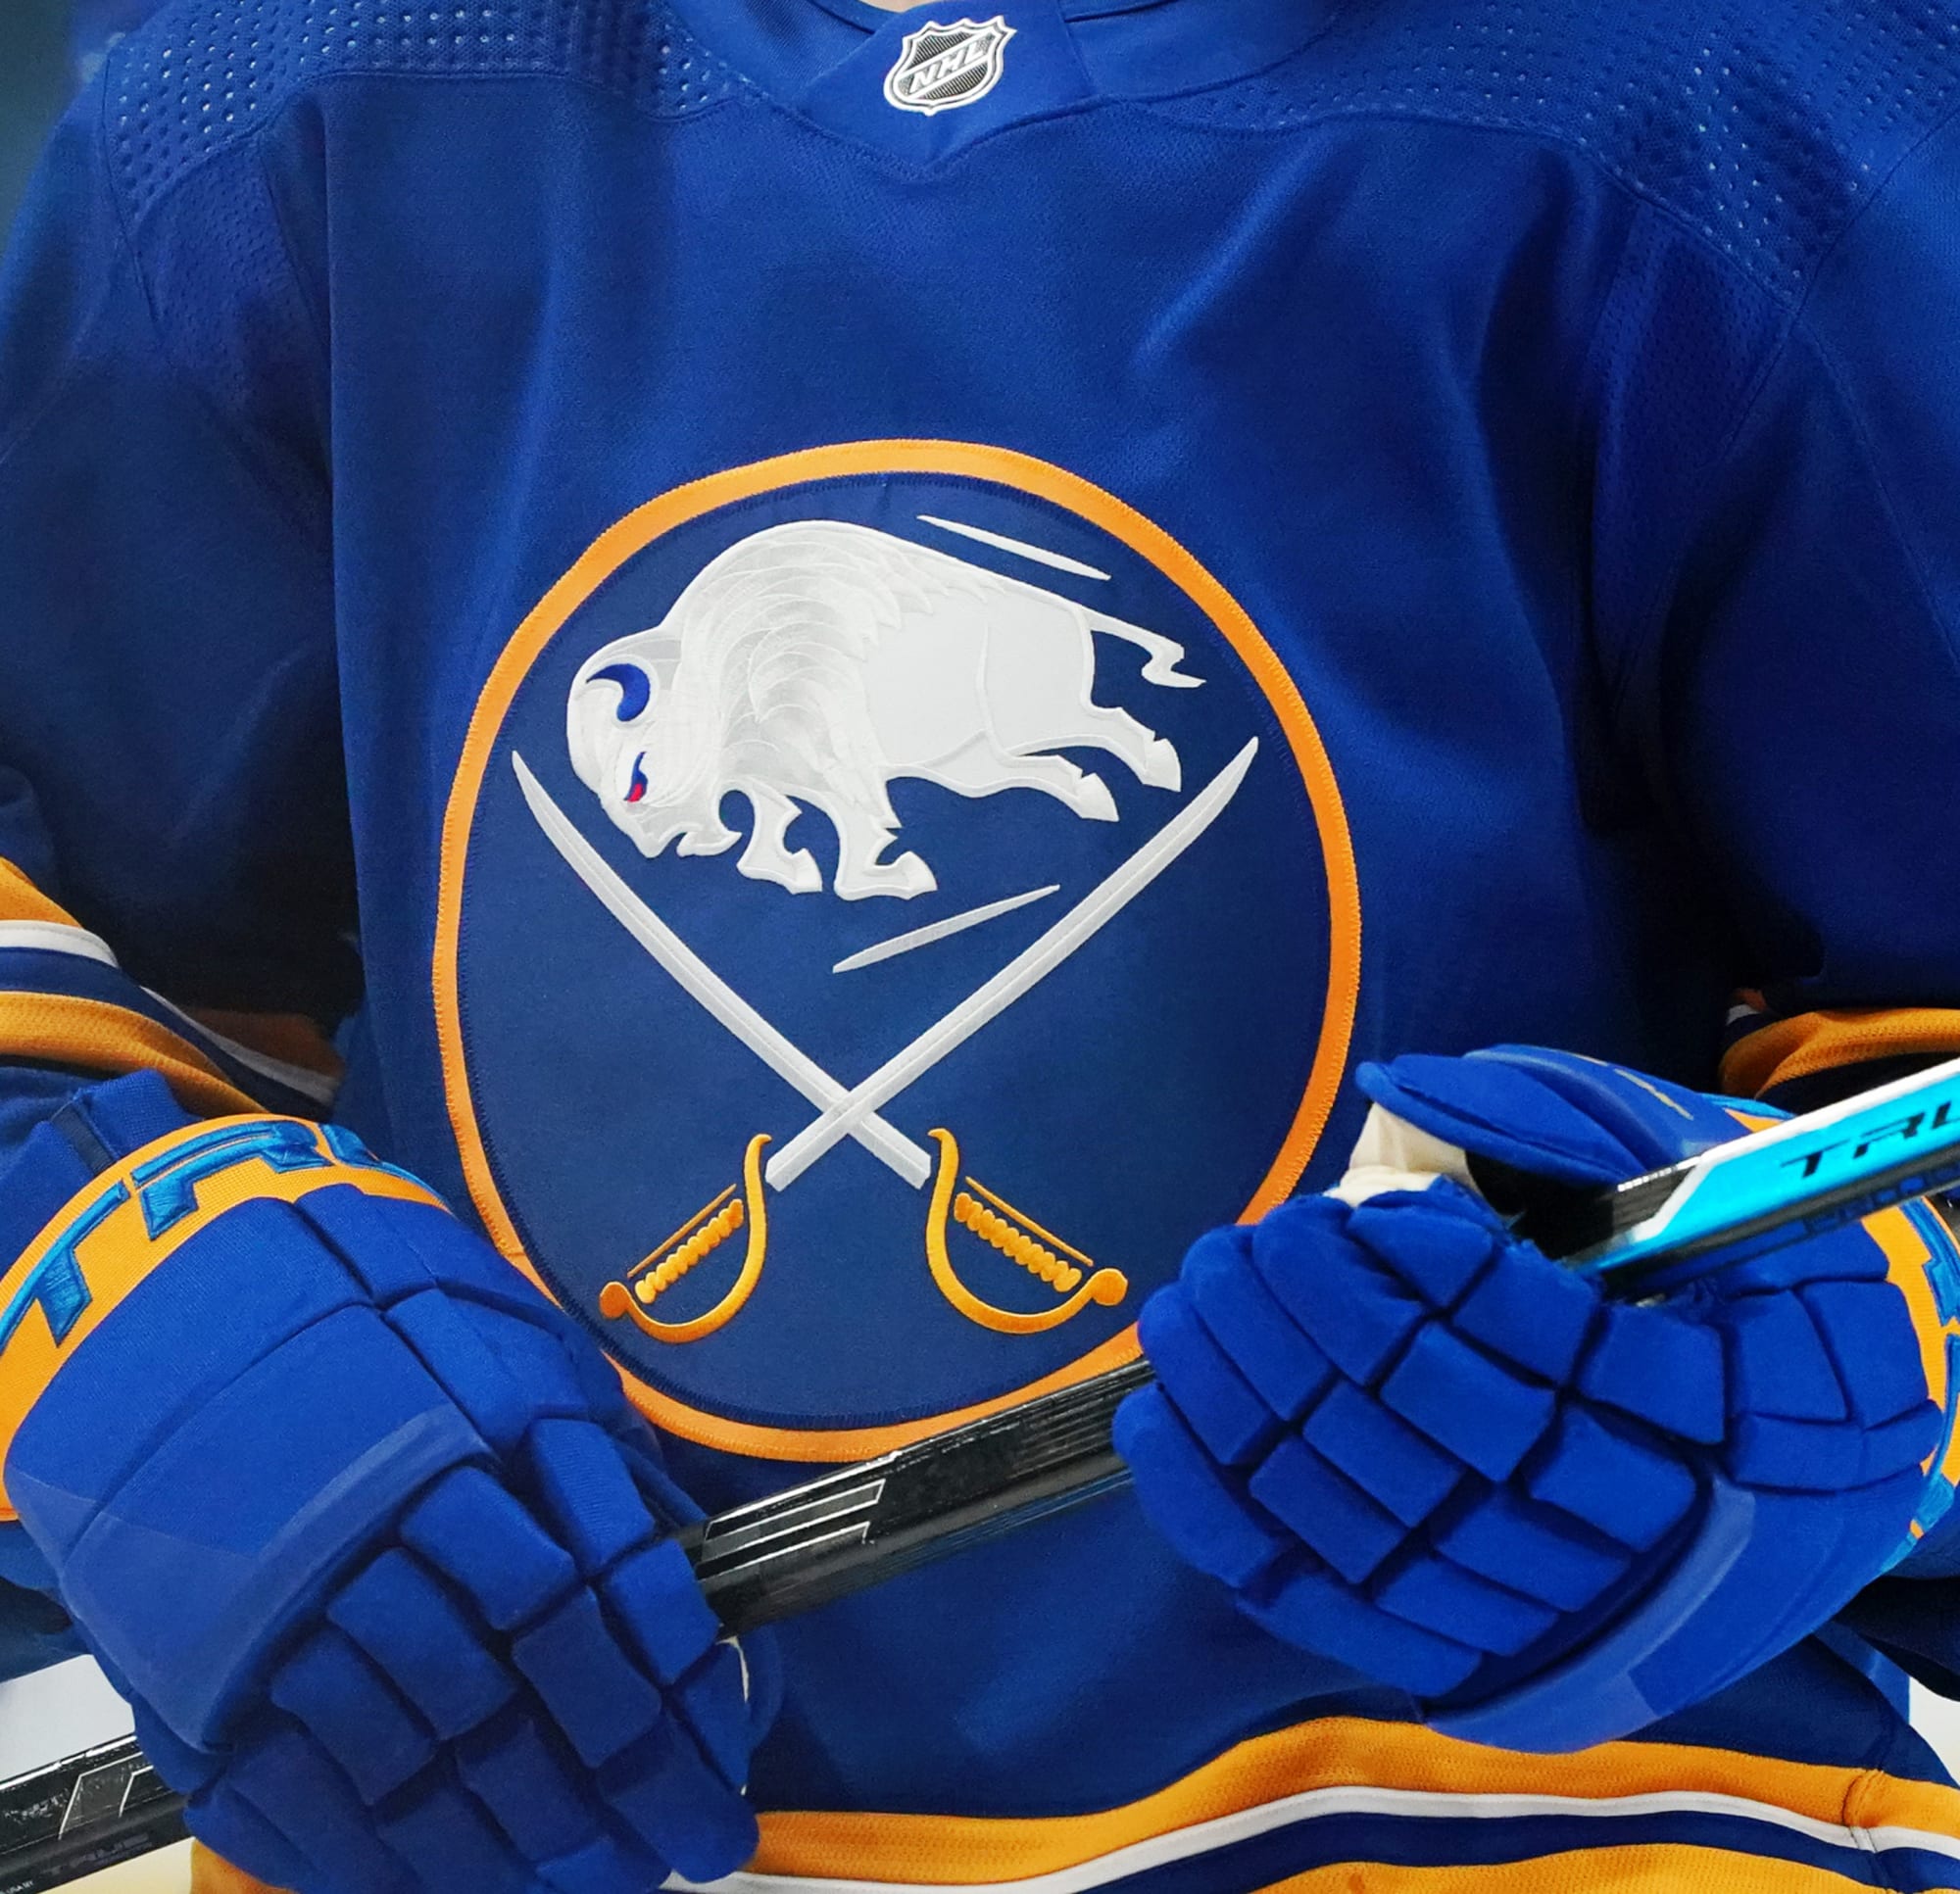 Sportsnet on X: The Buffalo Sabres are reportedly bringing these back as  an alternate jersey next season. 👀 Do you like the look?   / X